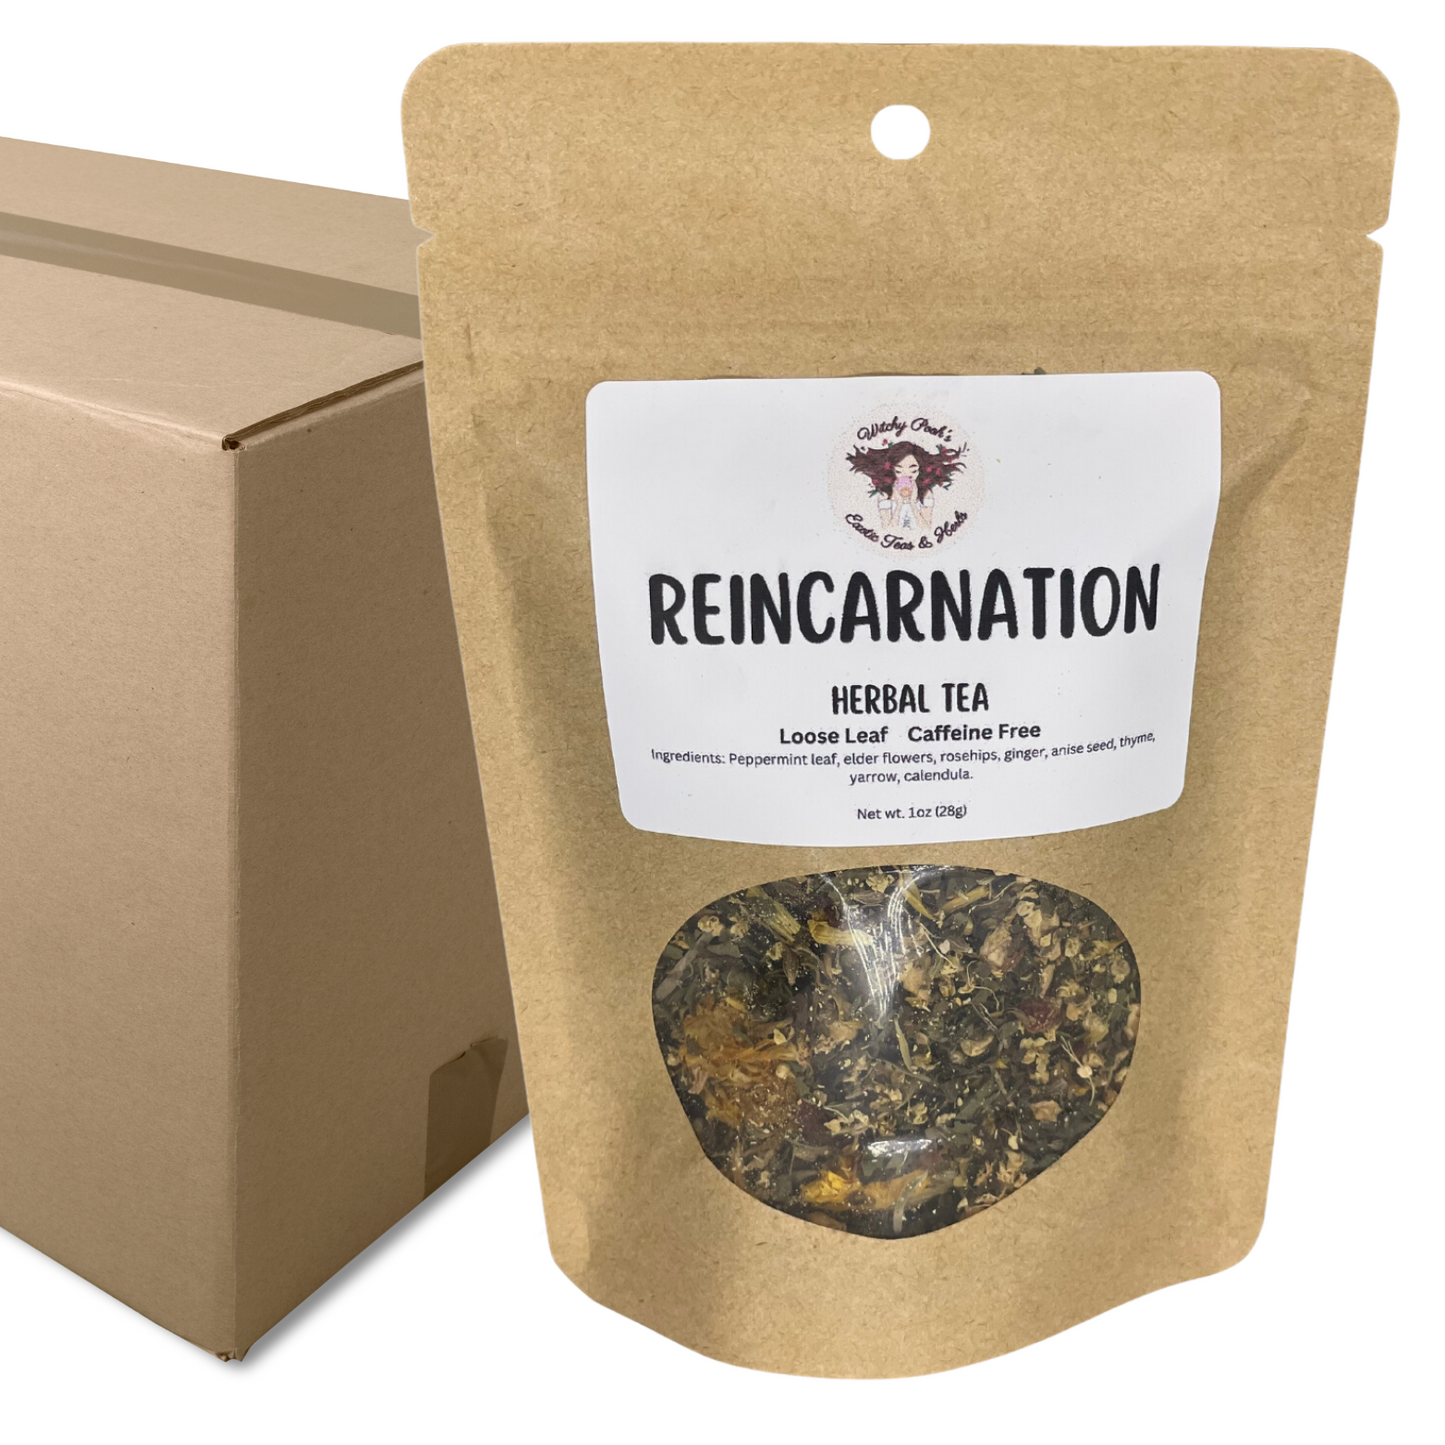 Witchy Pooh's Reincarnation Loose Leaf Functional Herbal Tea, Caffeine Free, For Cold and Flu Relief, Immune Boost